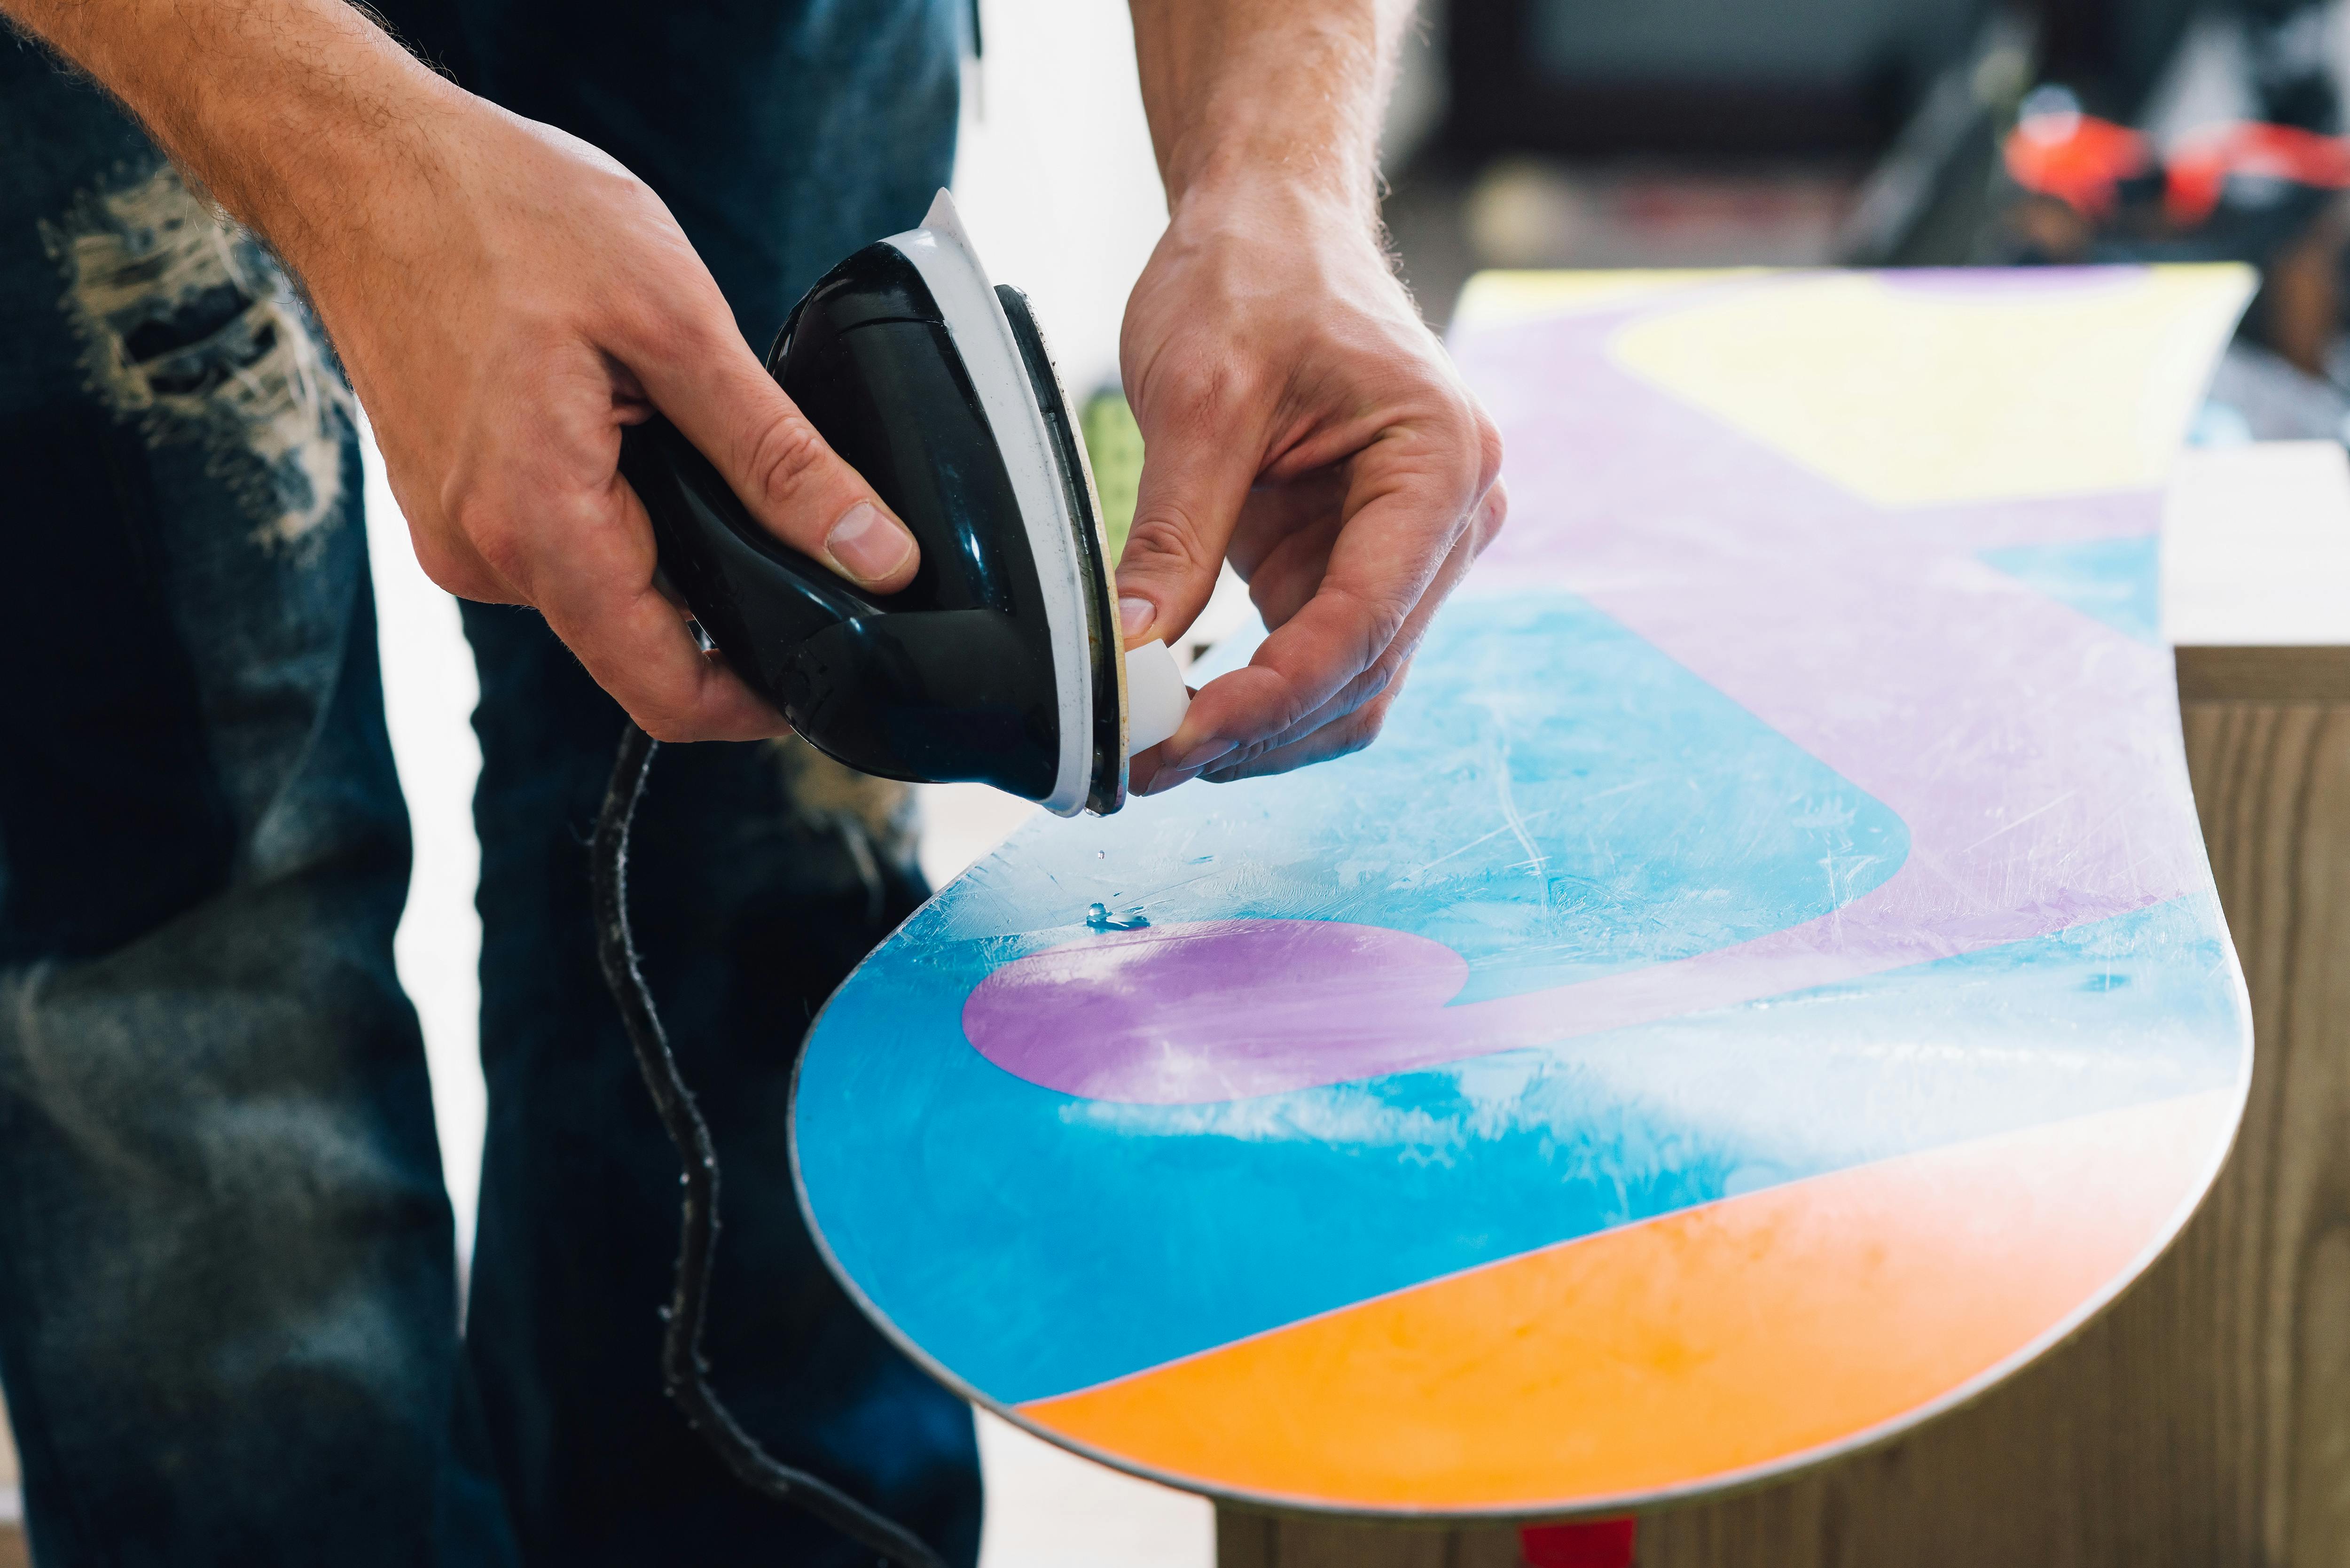 Everything you need to wax a snowboard at home